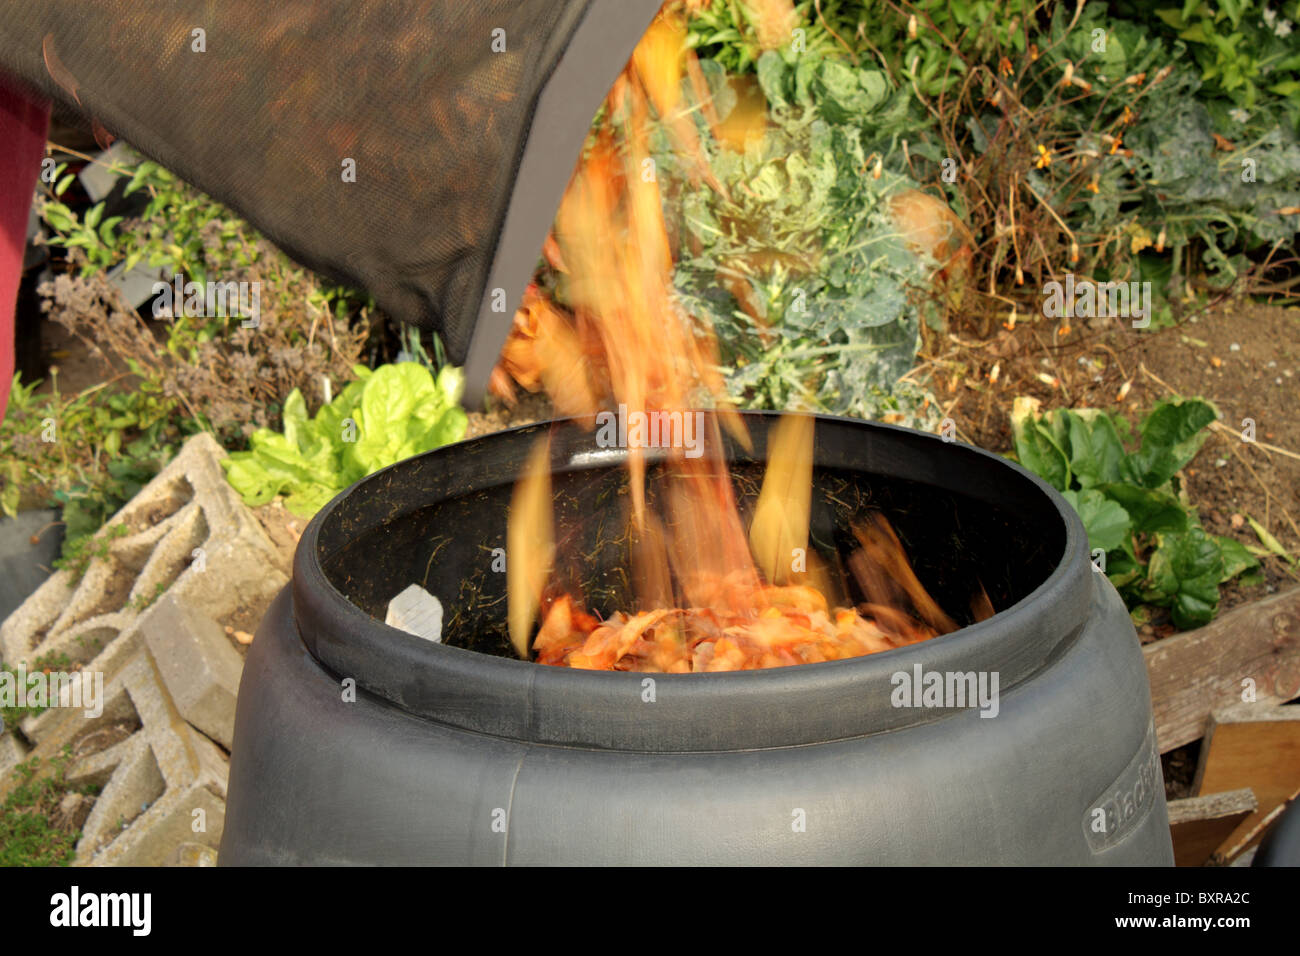 Leaves from a garden vacuum leaf collection bag being placed into a compost bin Stock Photo